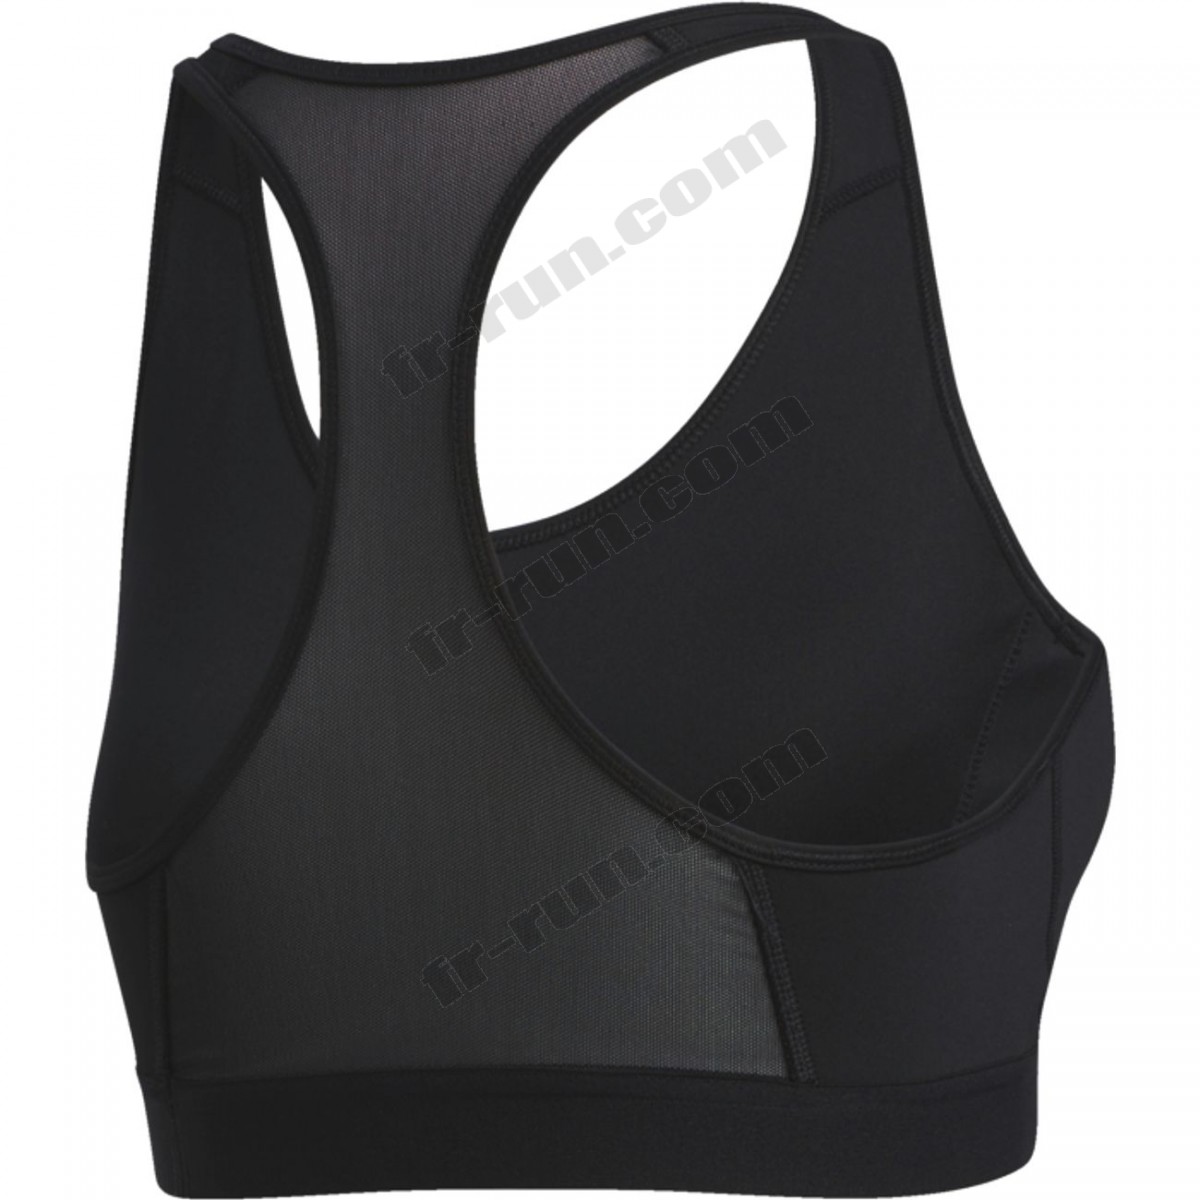 Adidas/BRASSIERE Fitness femme ADIDAS DRST ASK √ Nouveau style √ Soldes - -1